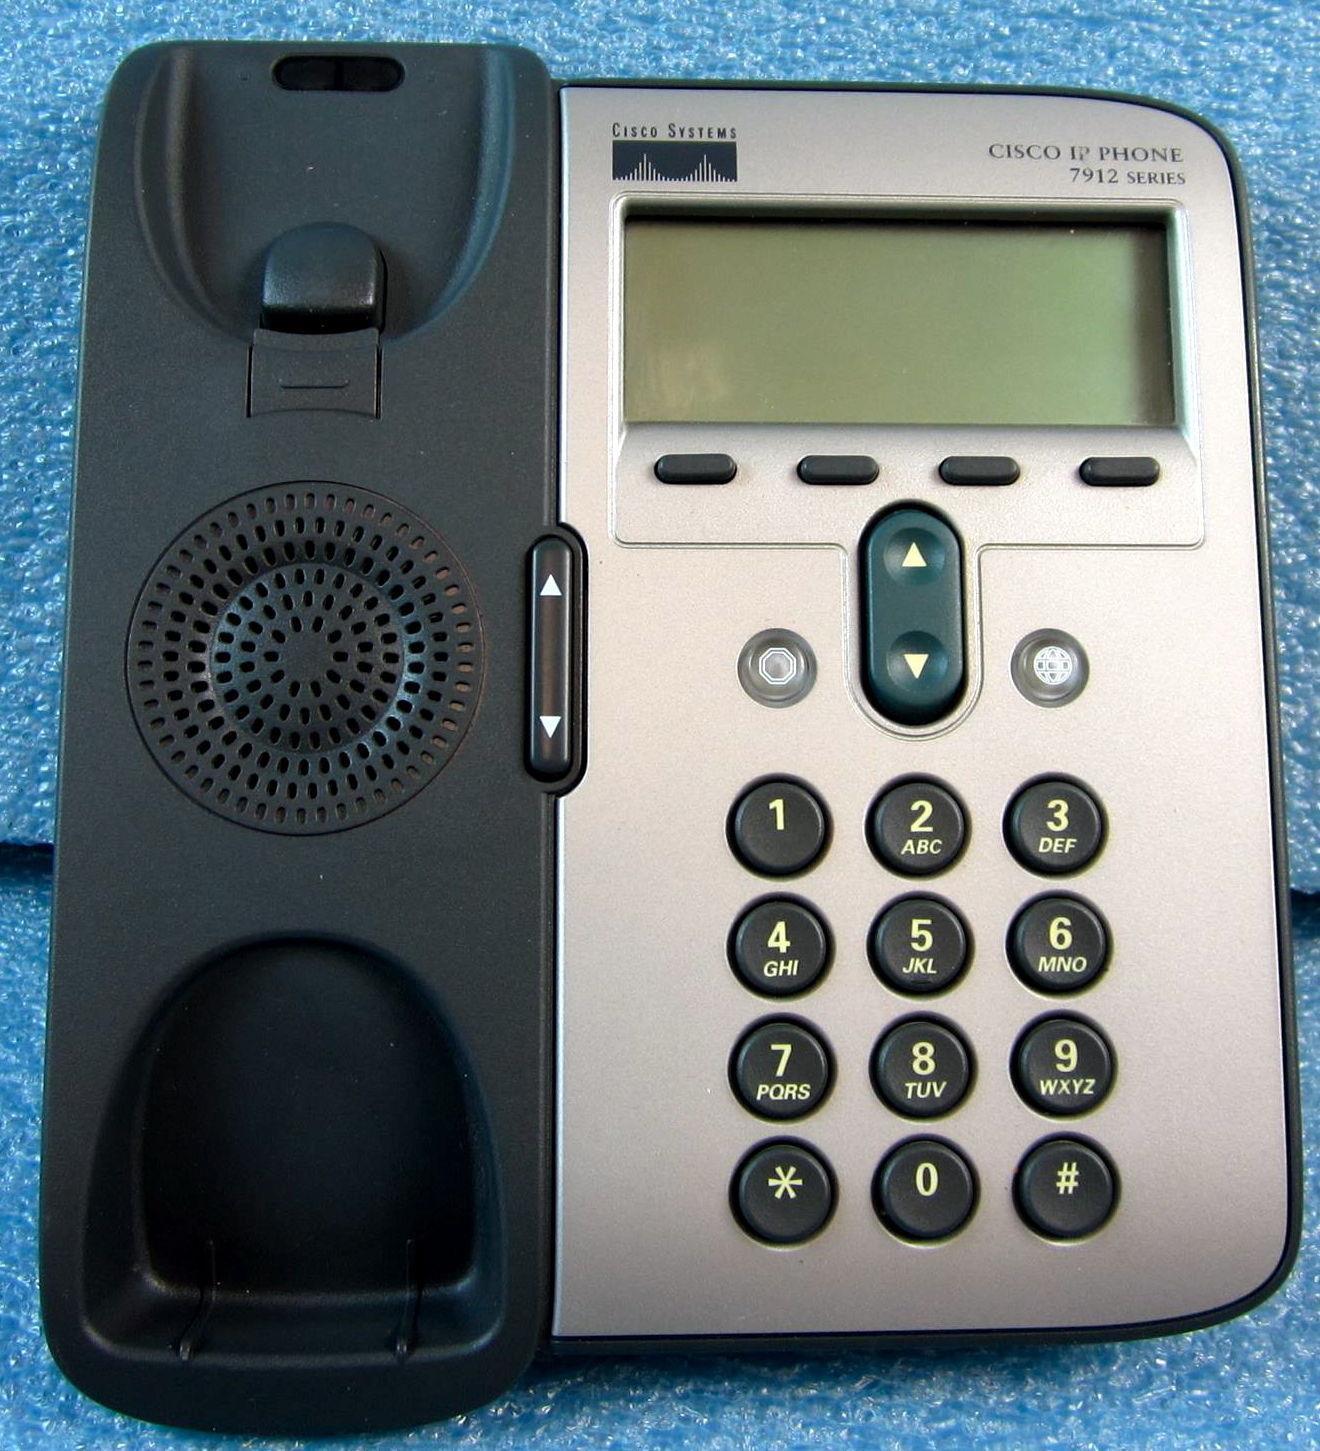 Cisco IP Phone Series 7912 Handset Included Tested and Working